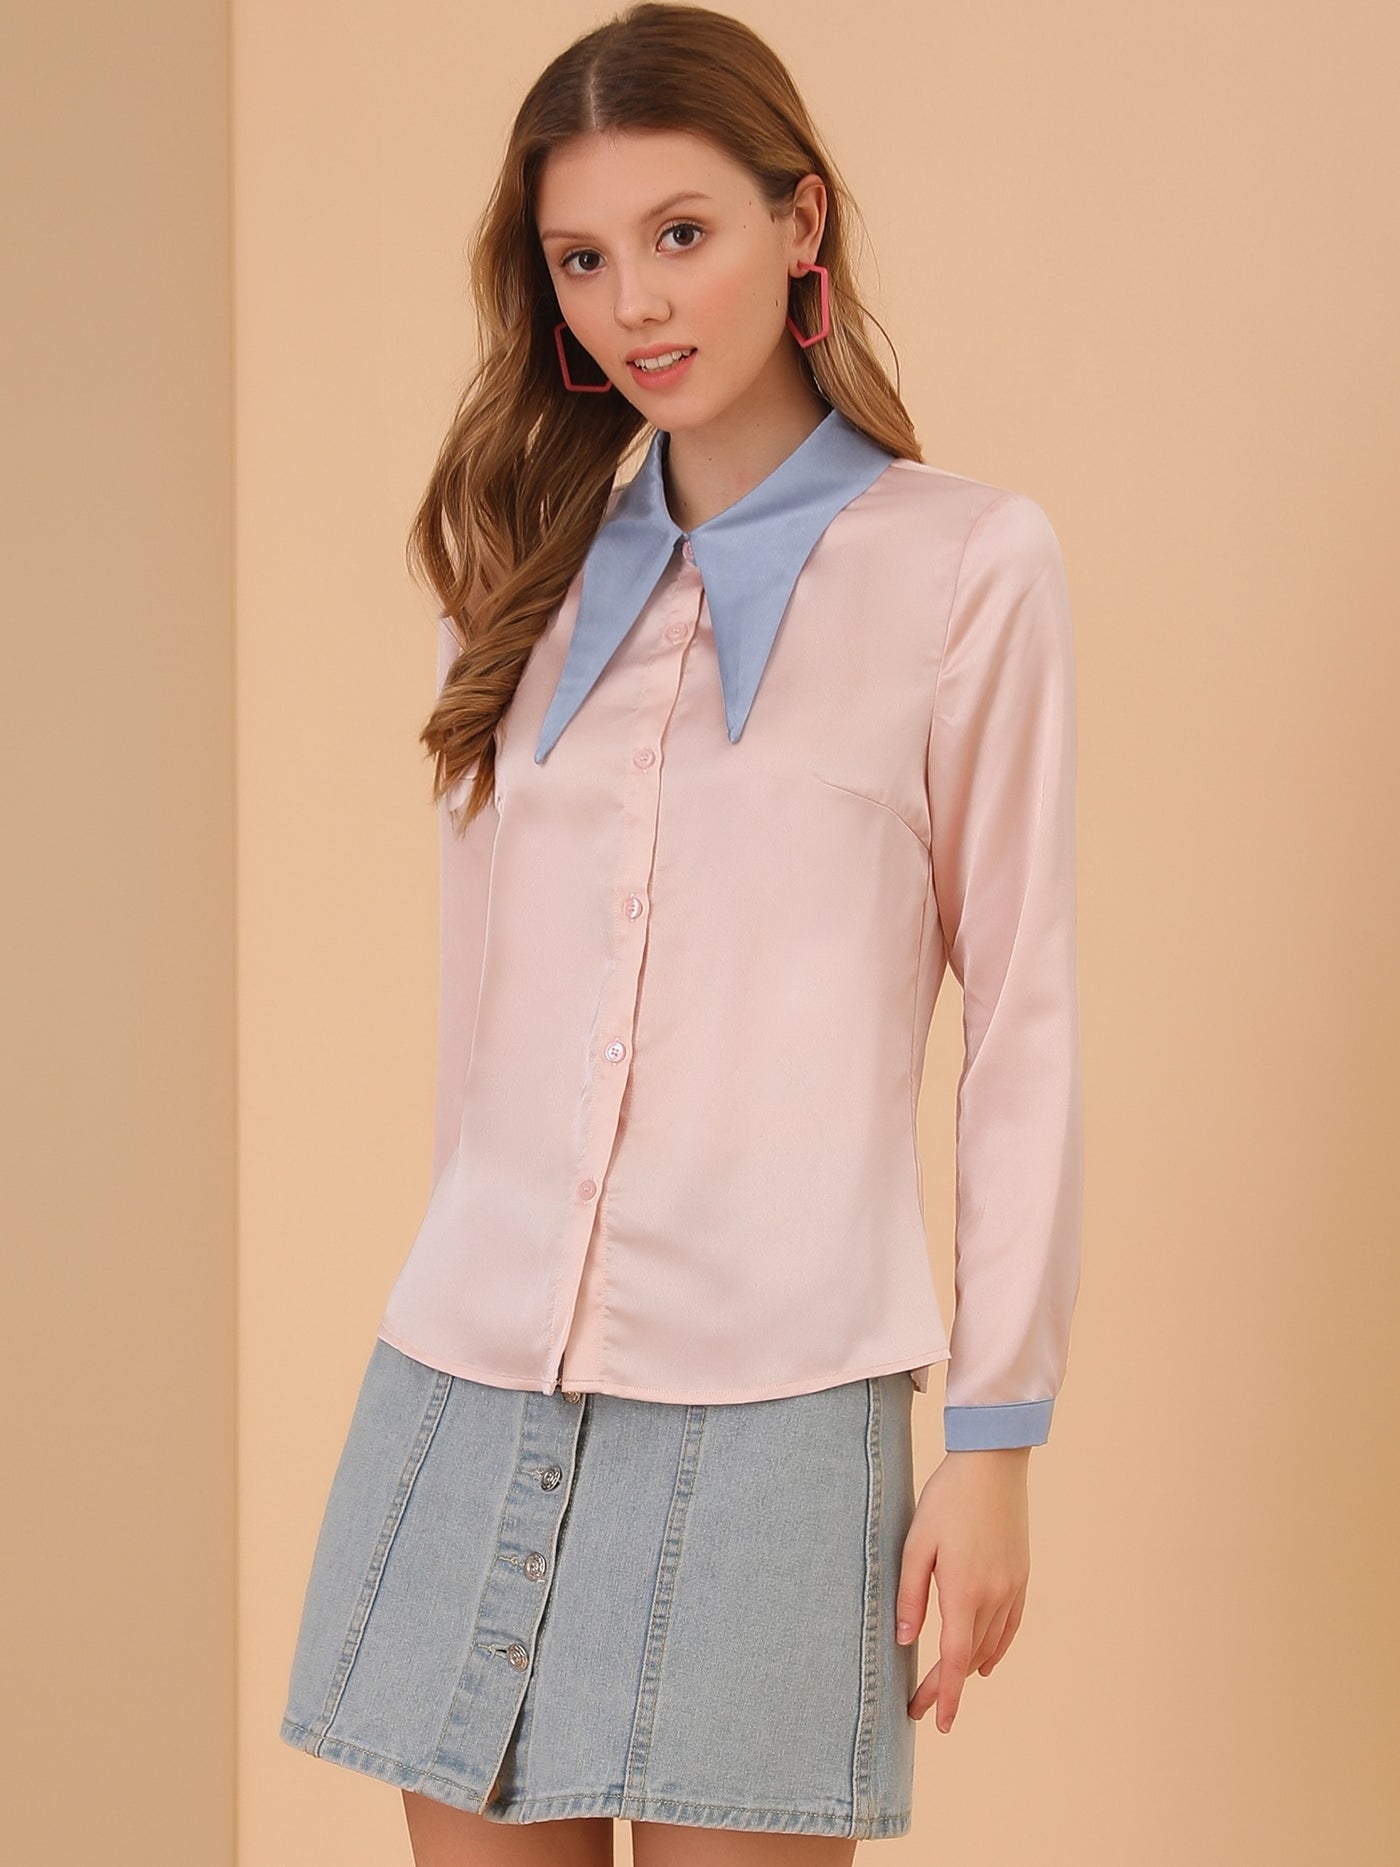 Allegra K Long Sleeve Contrast Color Collared Button Down Satin Shirt Blouse